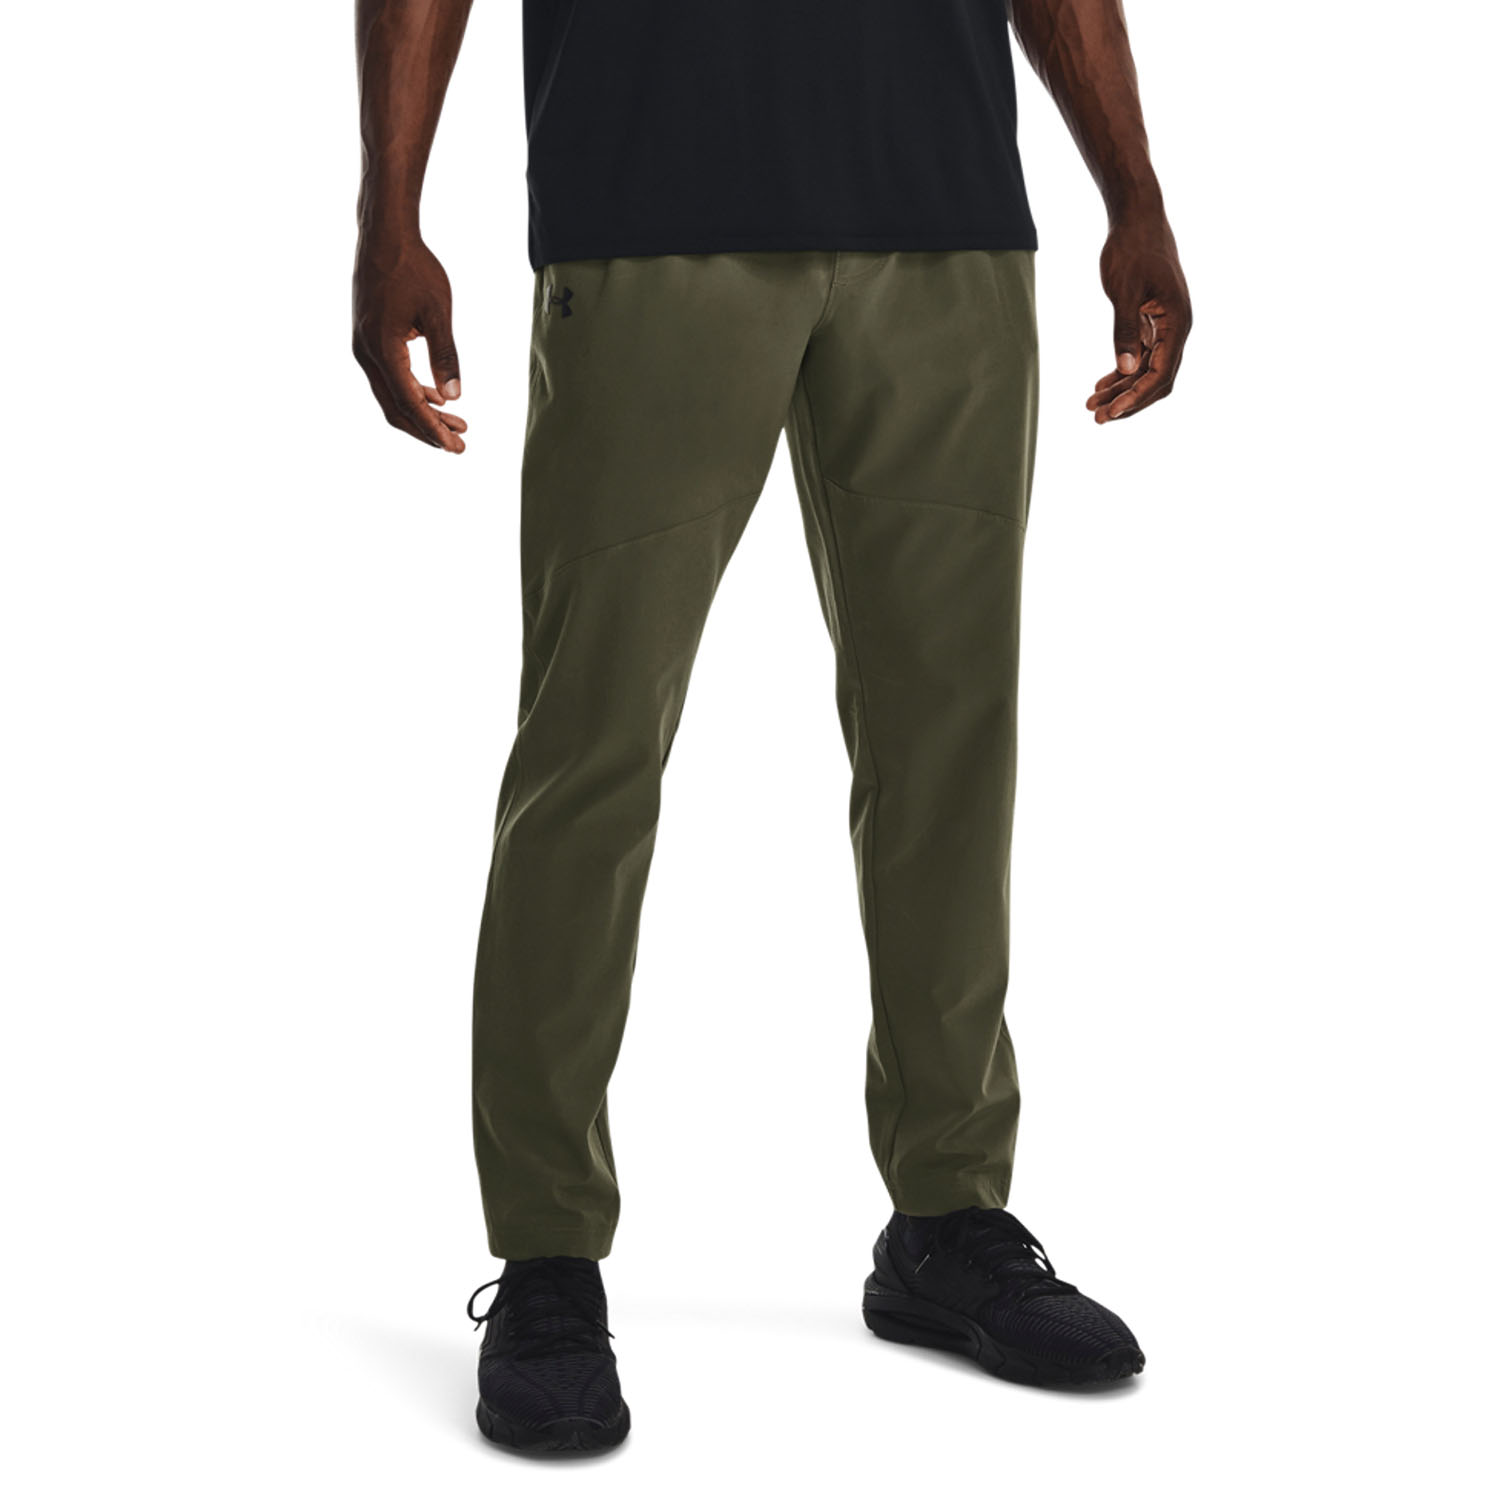 Under Armour Stretch Woven Pants - Marine Od Green/Black